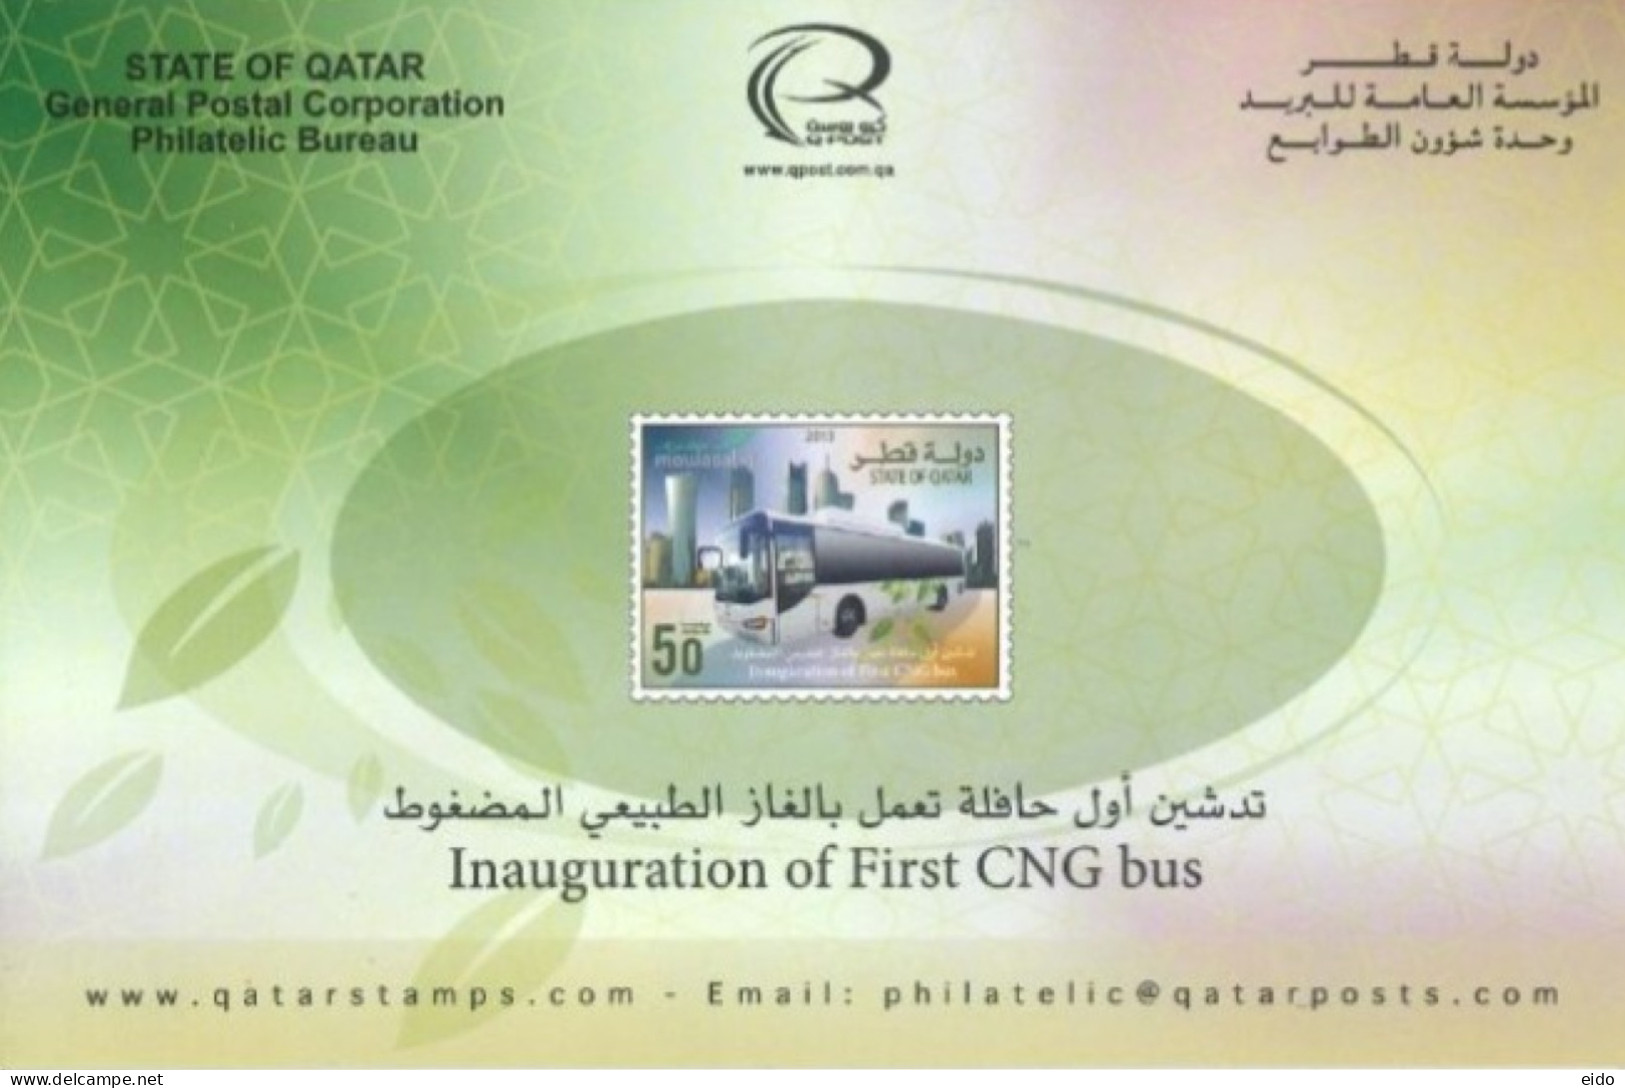 QATAR  - 2013, POSTAL STAMPS BULETIN OF INAUGURATION OF FIRST CNG BUS AND TECHNICAL DETAILS. - Qatar